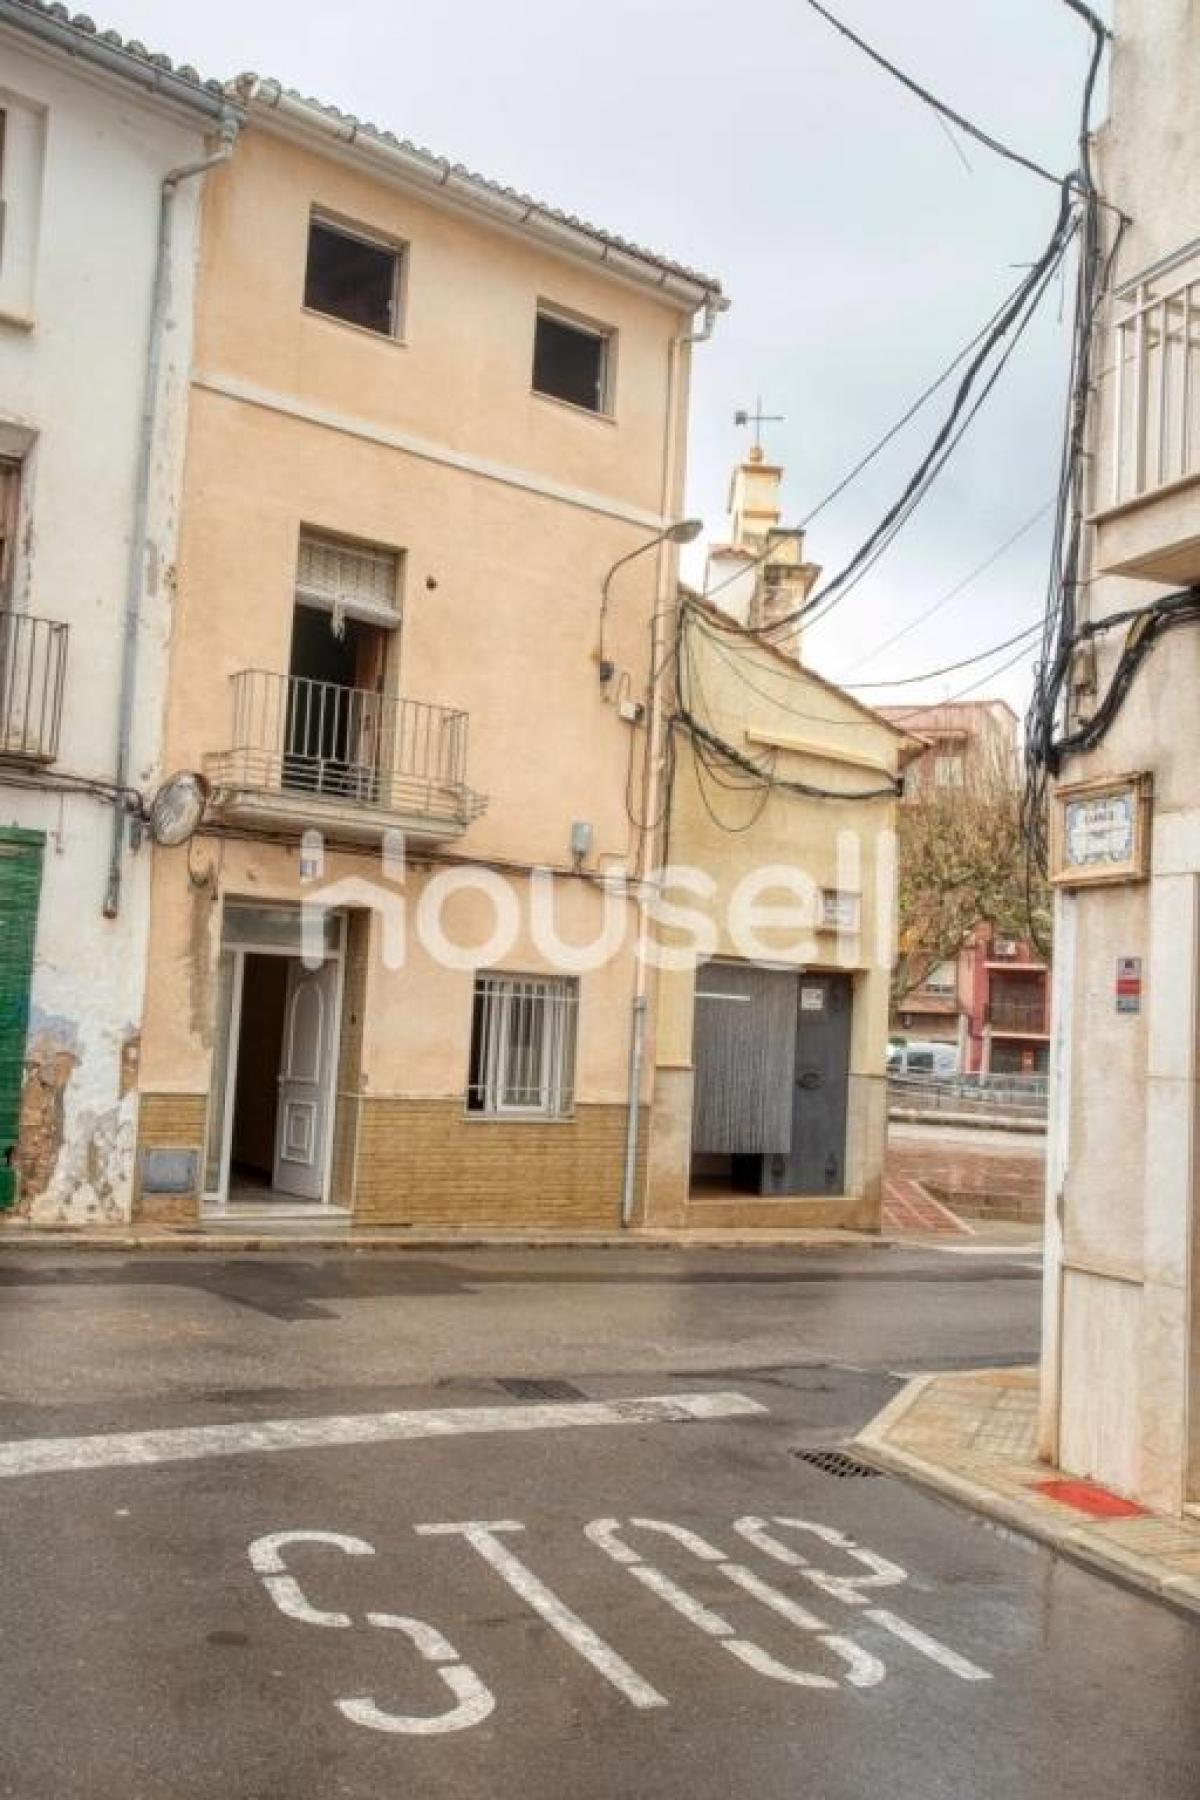 Picture of Home For Sale in Pego, Alicante, Spain